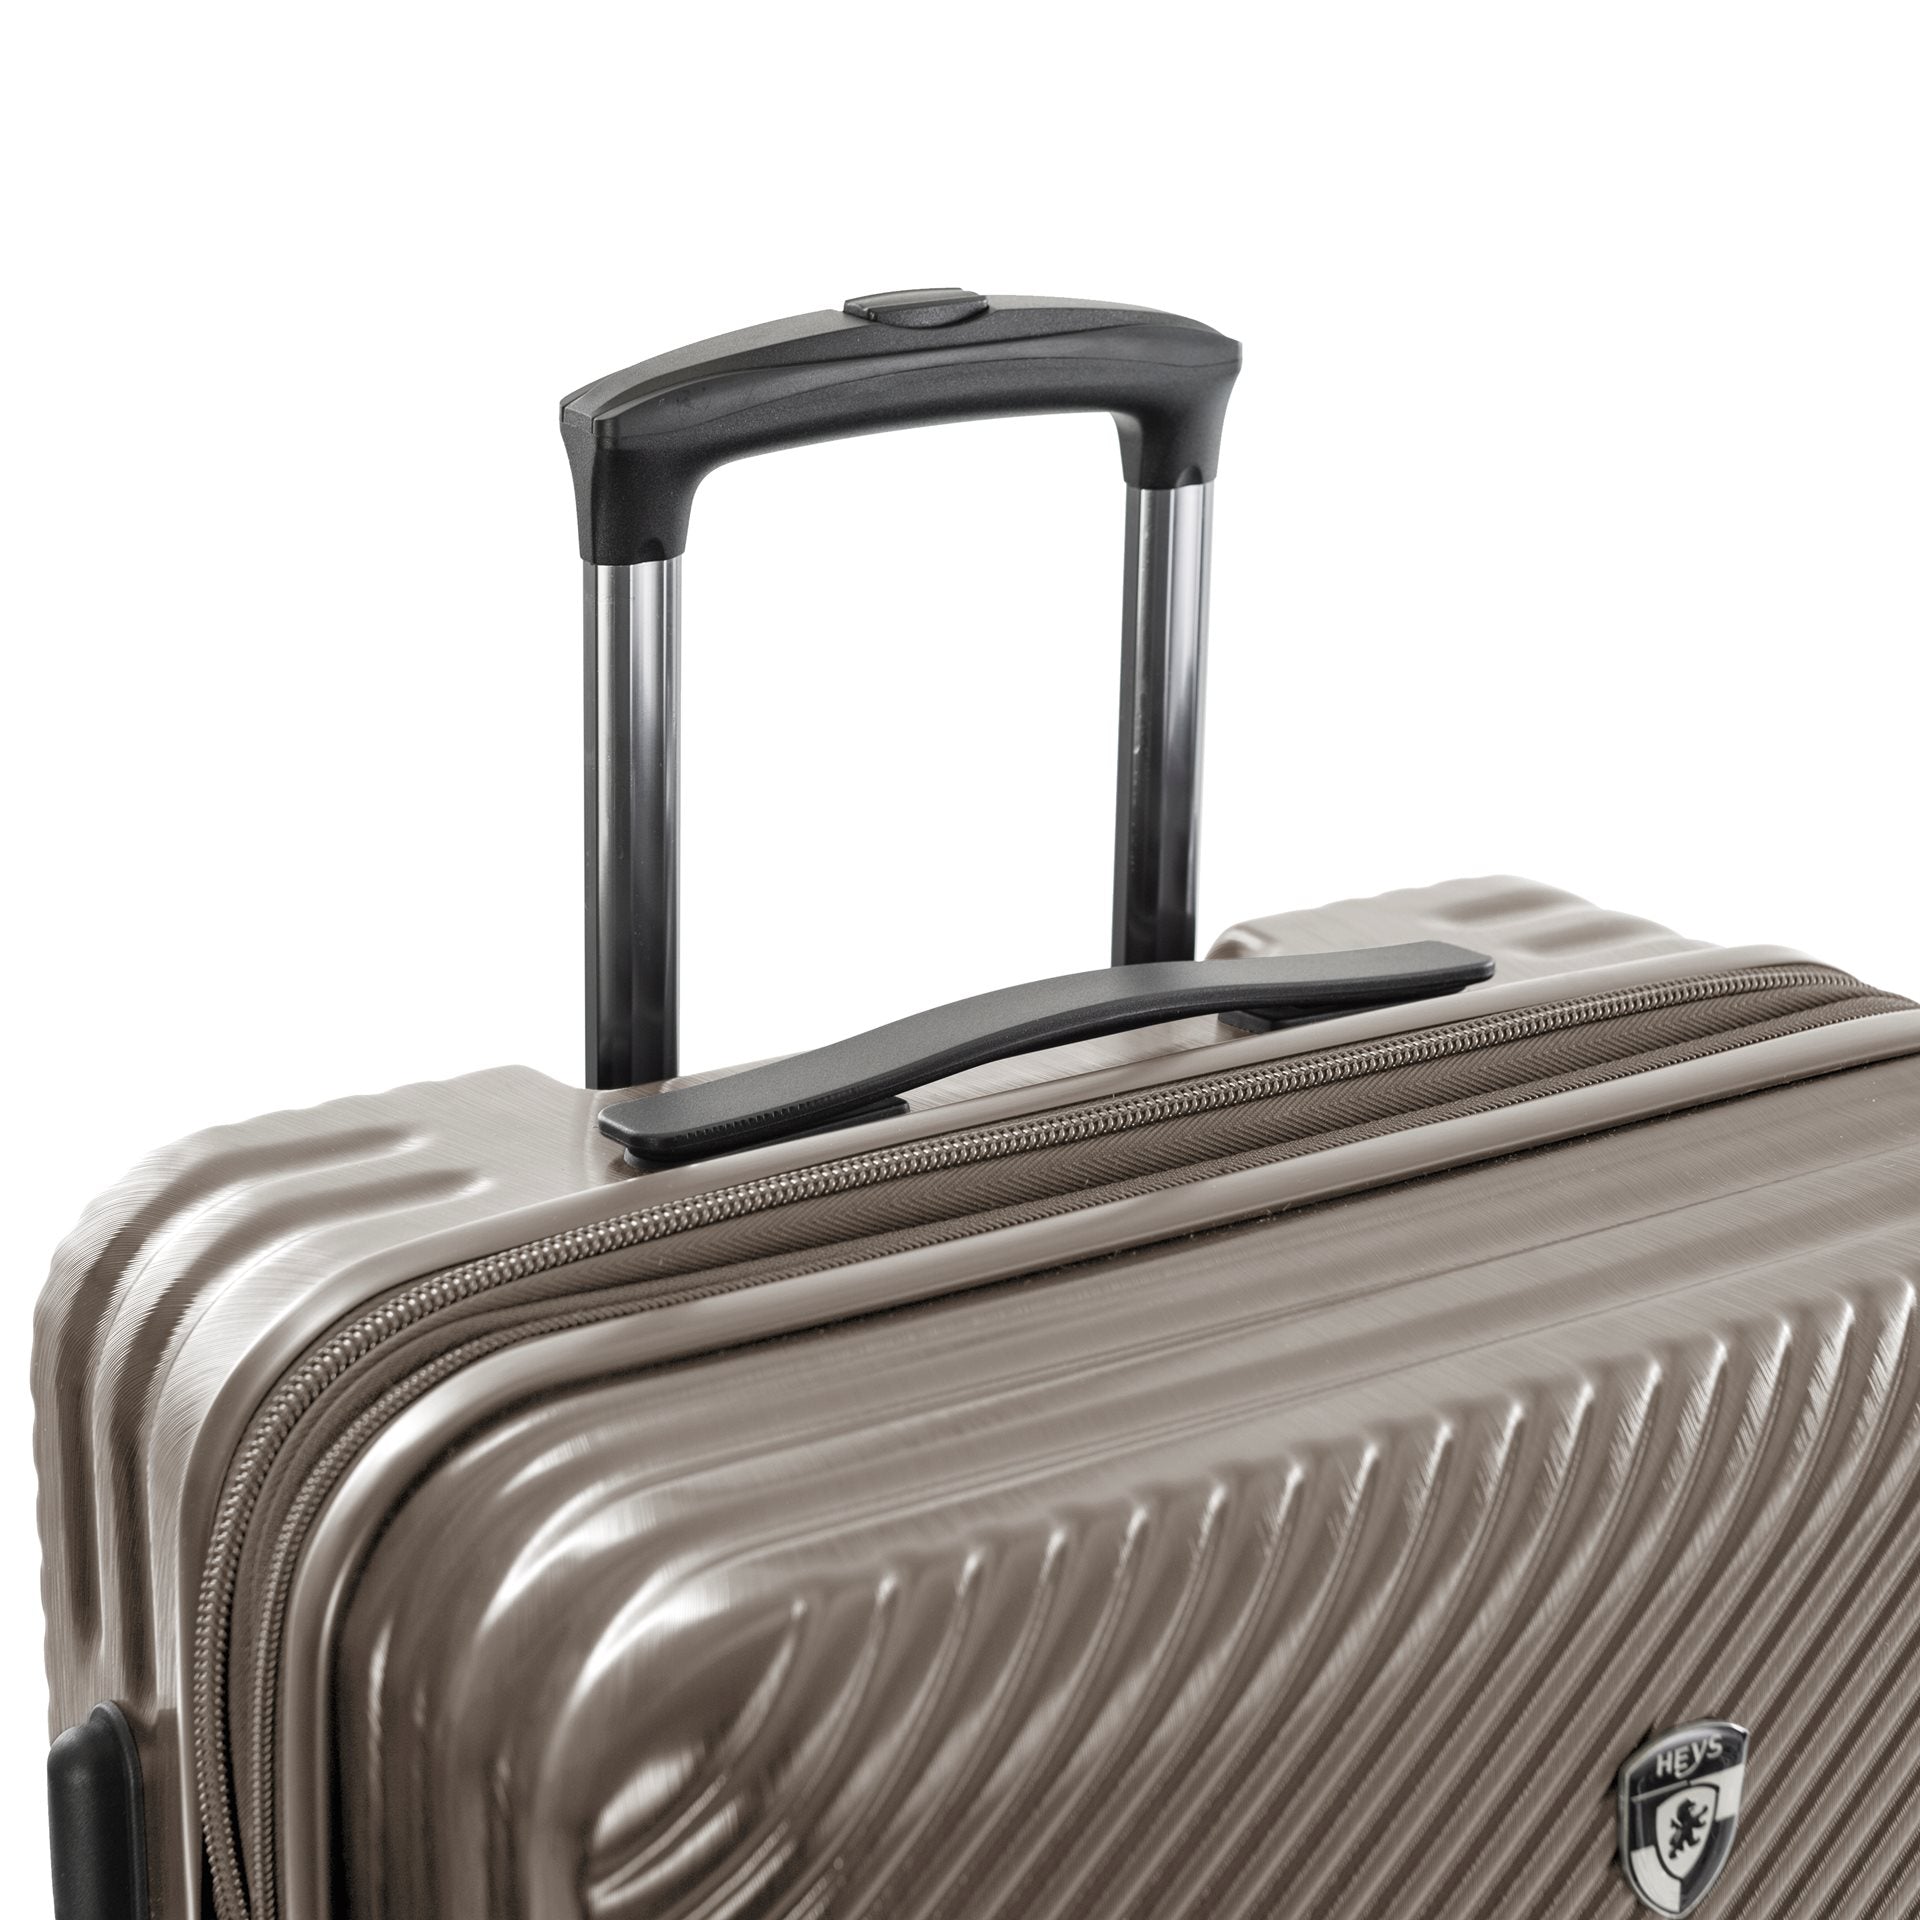 Heys Charge-A-Weigh 2.0 Koffer 30" (76 cm) - Taupe Ruimbagage Koffer - Reisartikelen-nl